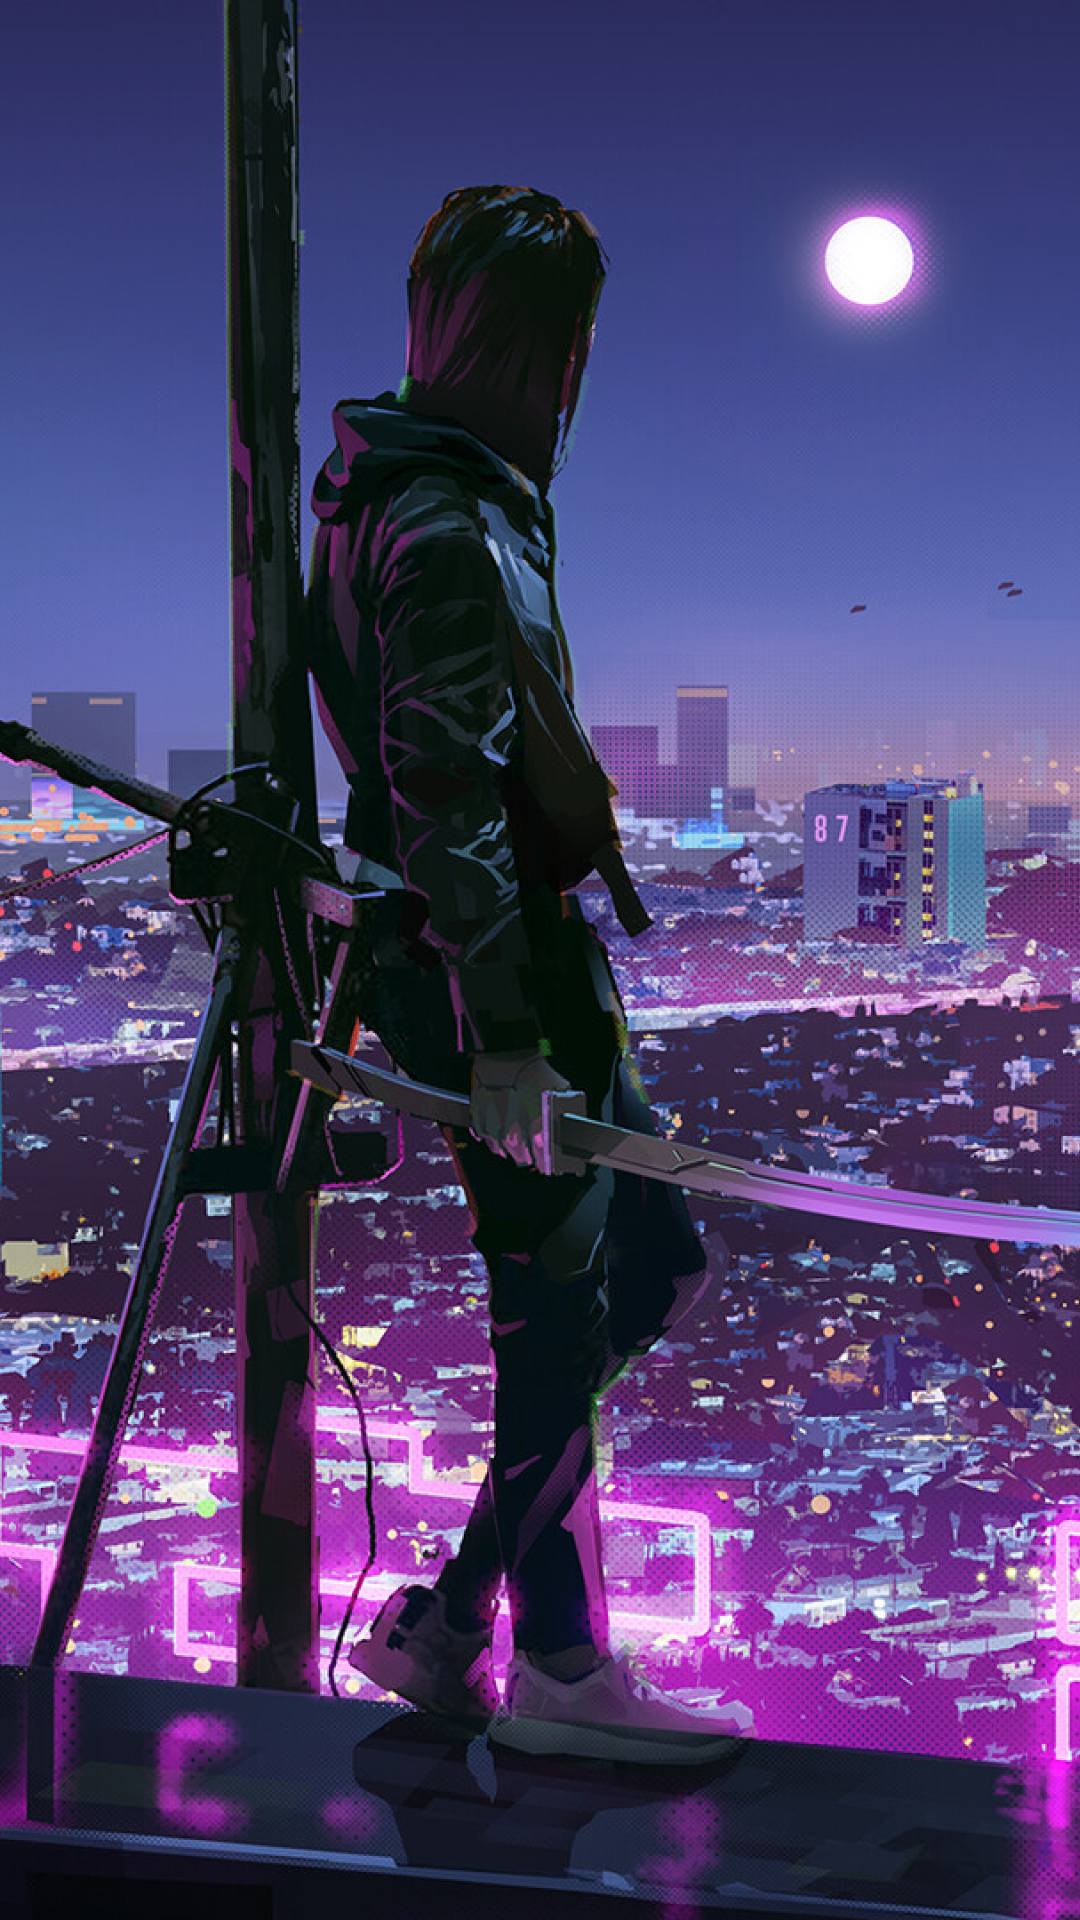 1080x19 Warrior Girl In Cyberpunk City Iphone 7 6s 6 Plus And Pixel Xl One Plus 3 3t 5 Wallpaper Hd Artist 4k Wallpapers Images Photos And Background